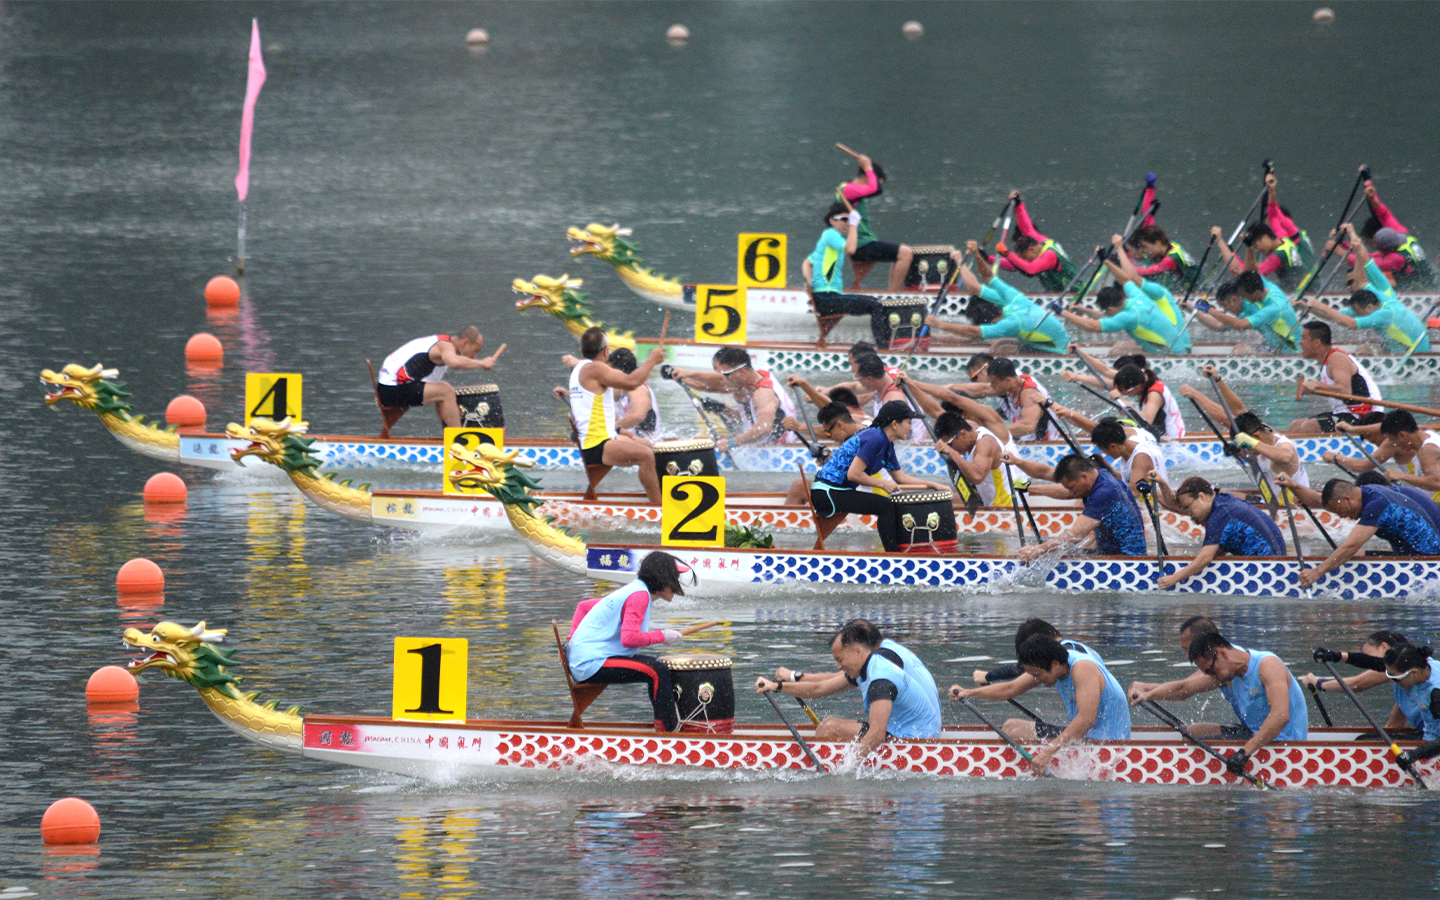 International teams make their return to the Dragon Boat Races